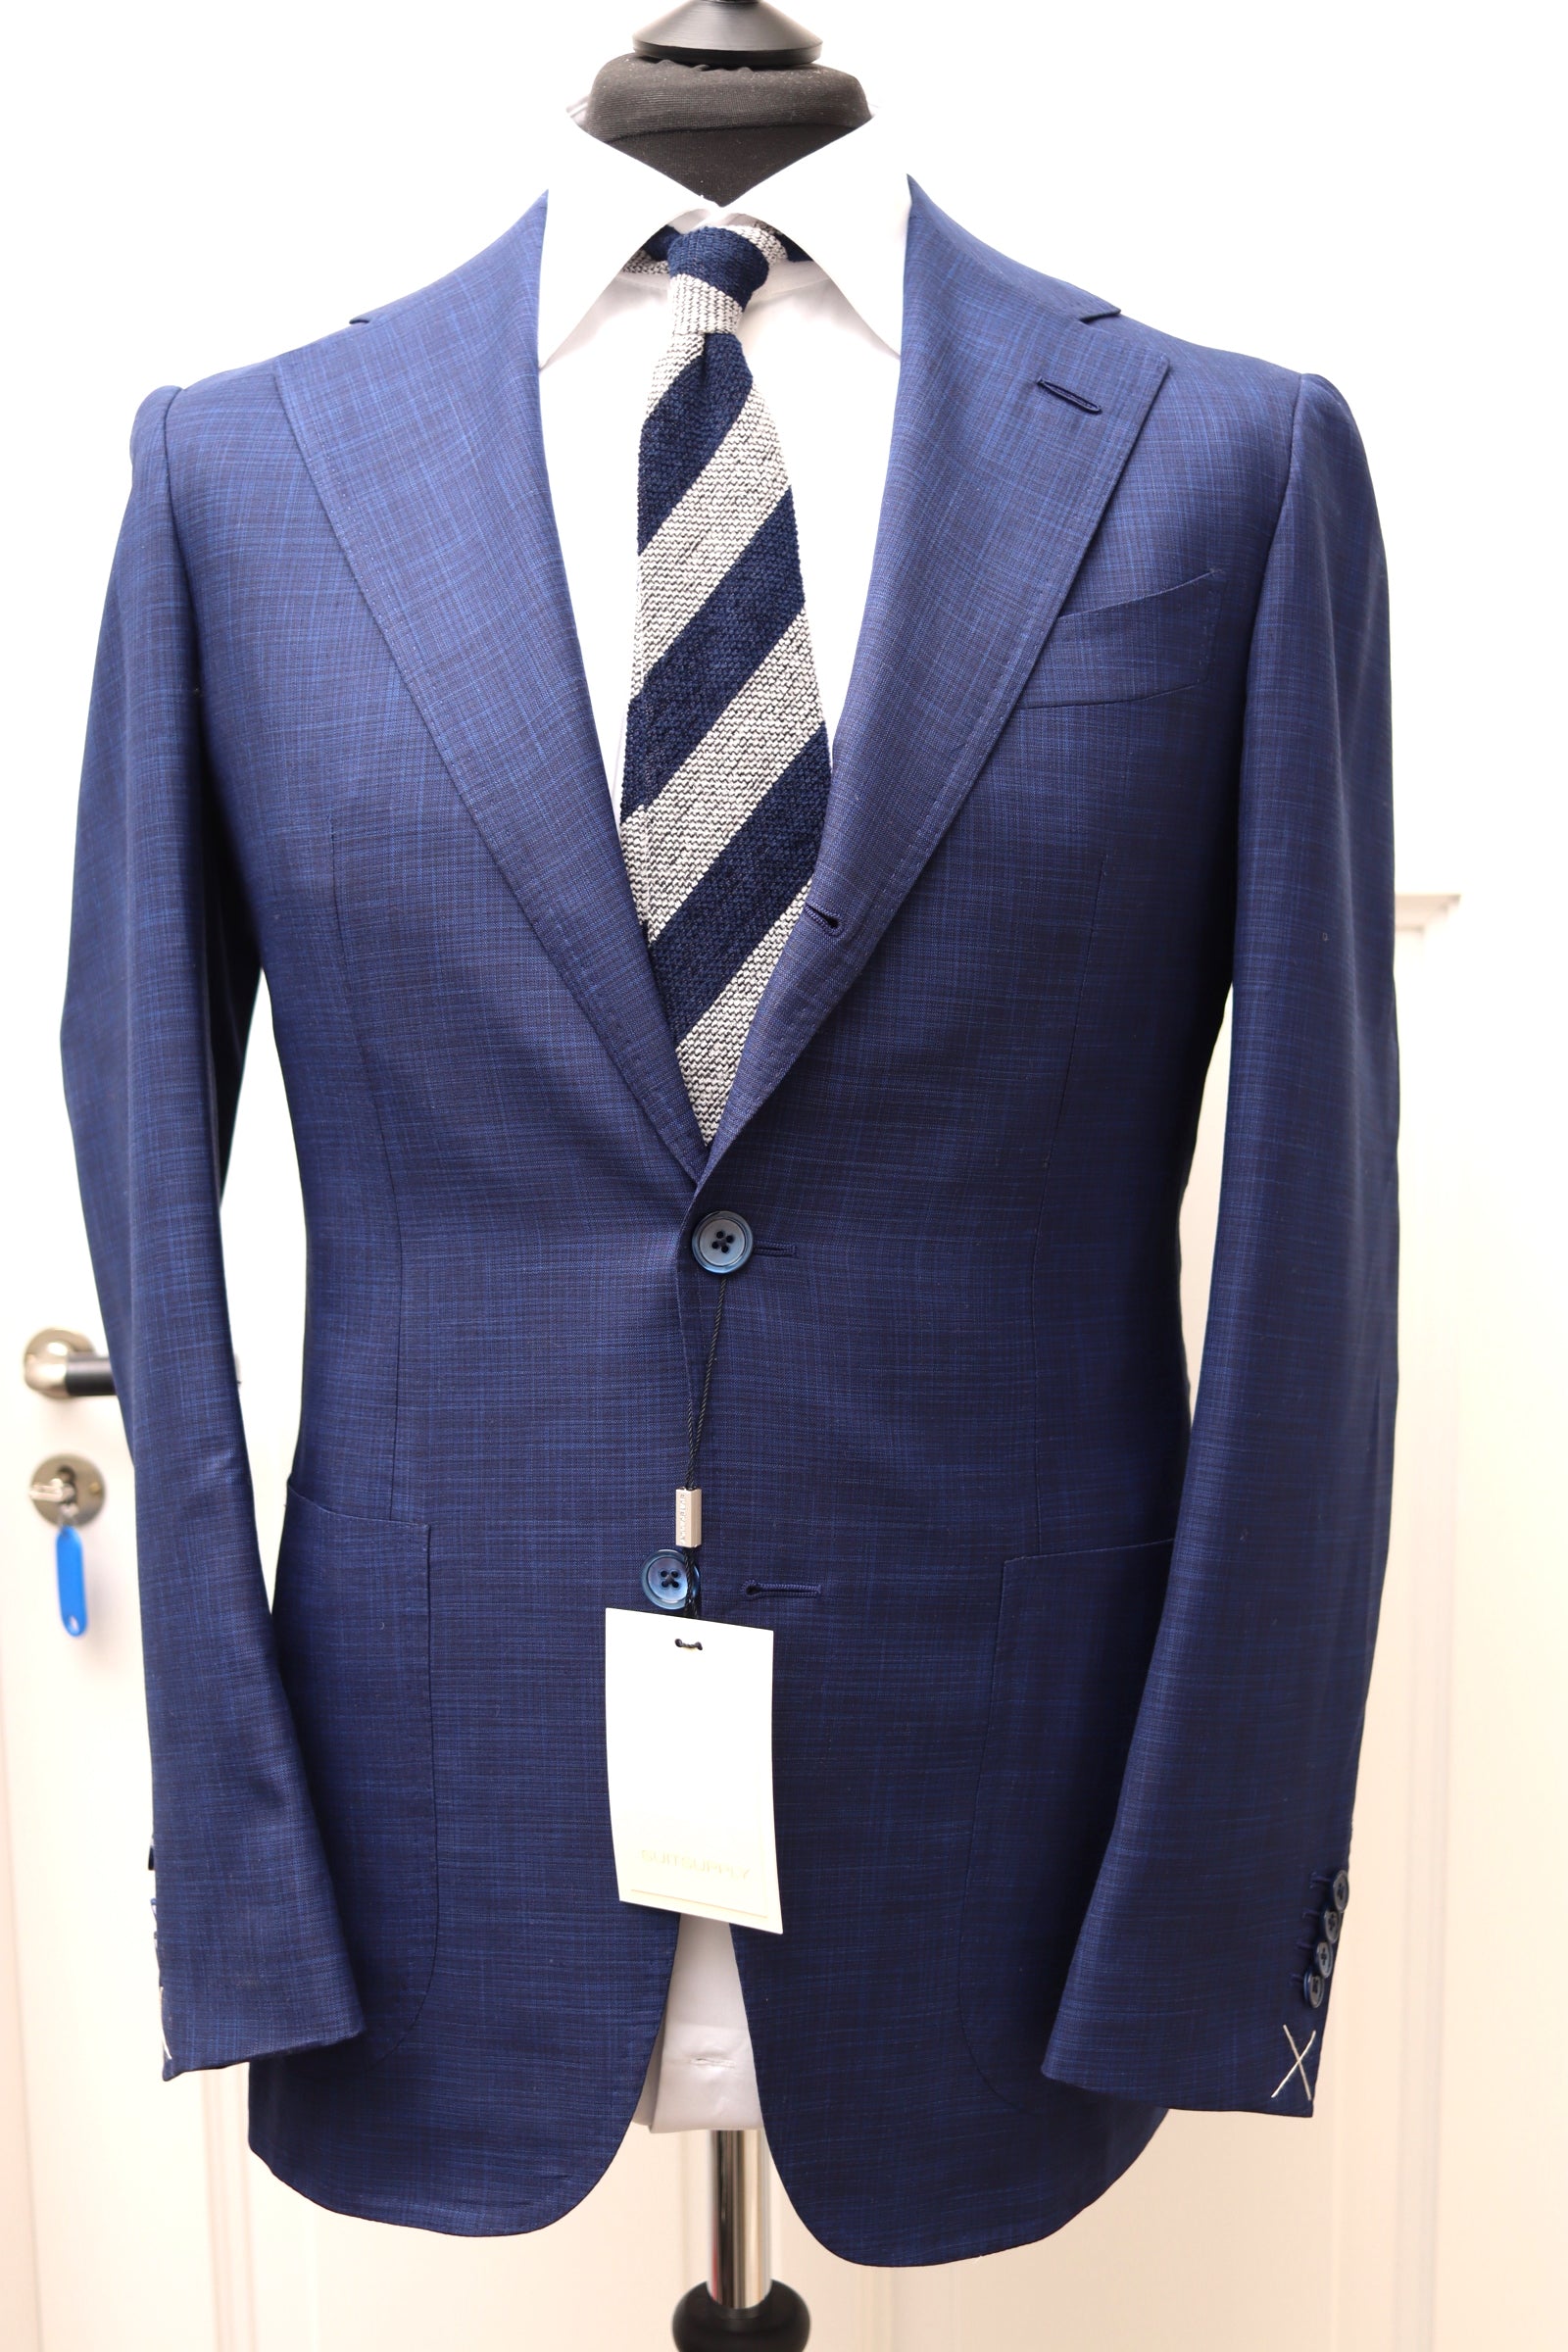 NWT Suitsupply Havana Mid Blue Wool/Silk Check Full Canvas Suit - Size 38R